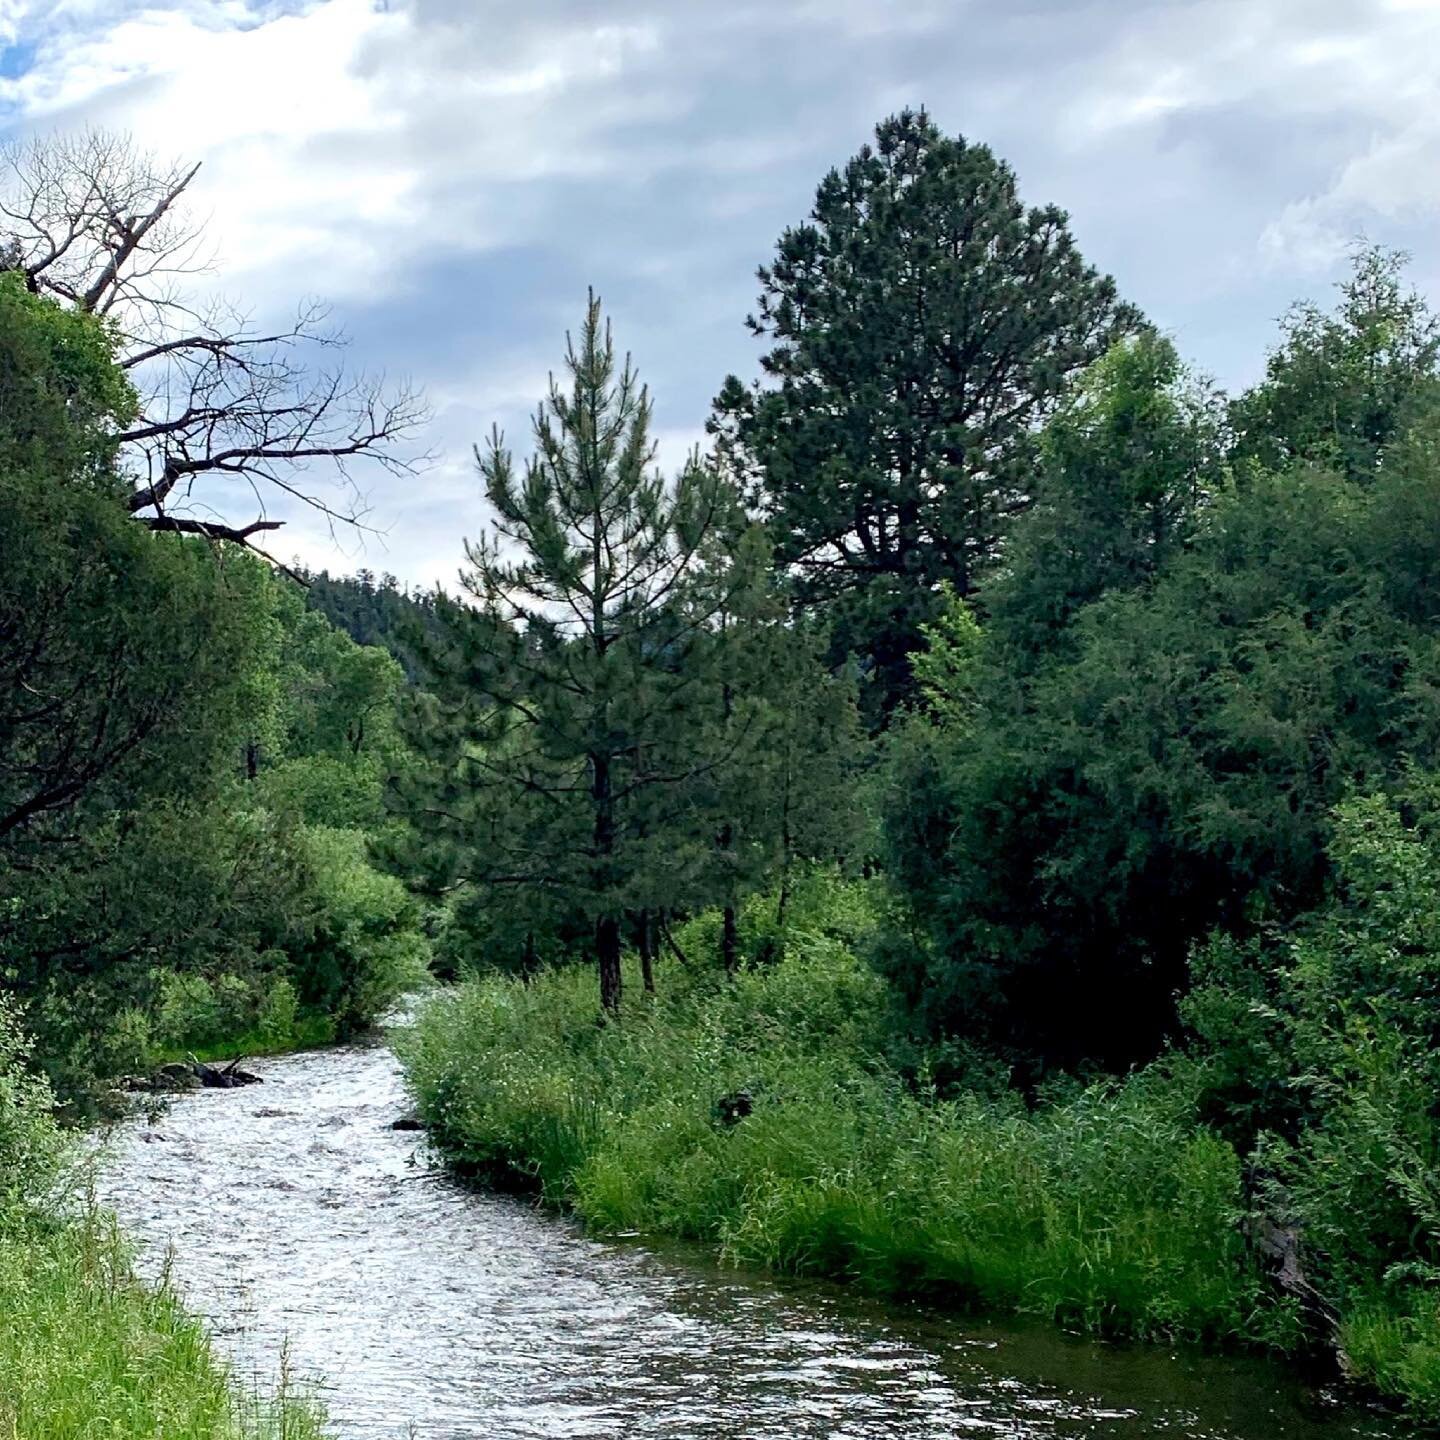 Just around the riverbend&hellip; I never tire of this view or the sound of this river rushing by our cabin door.
#newmexico